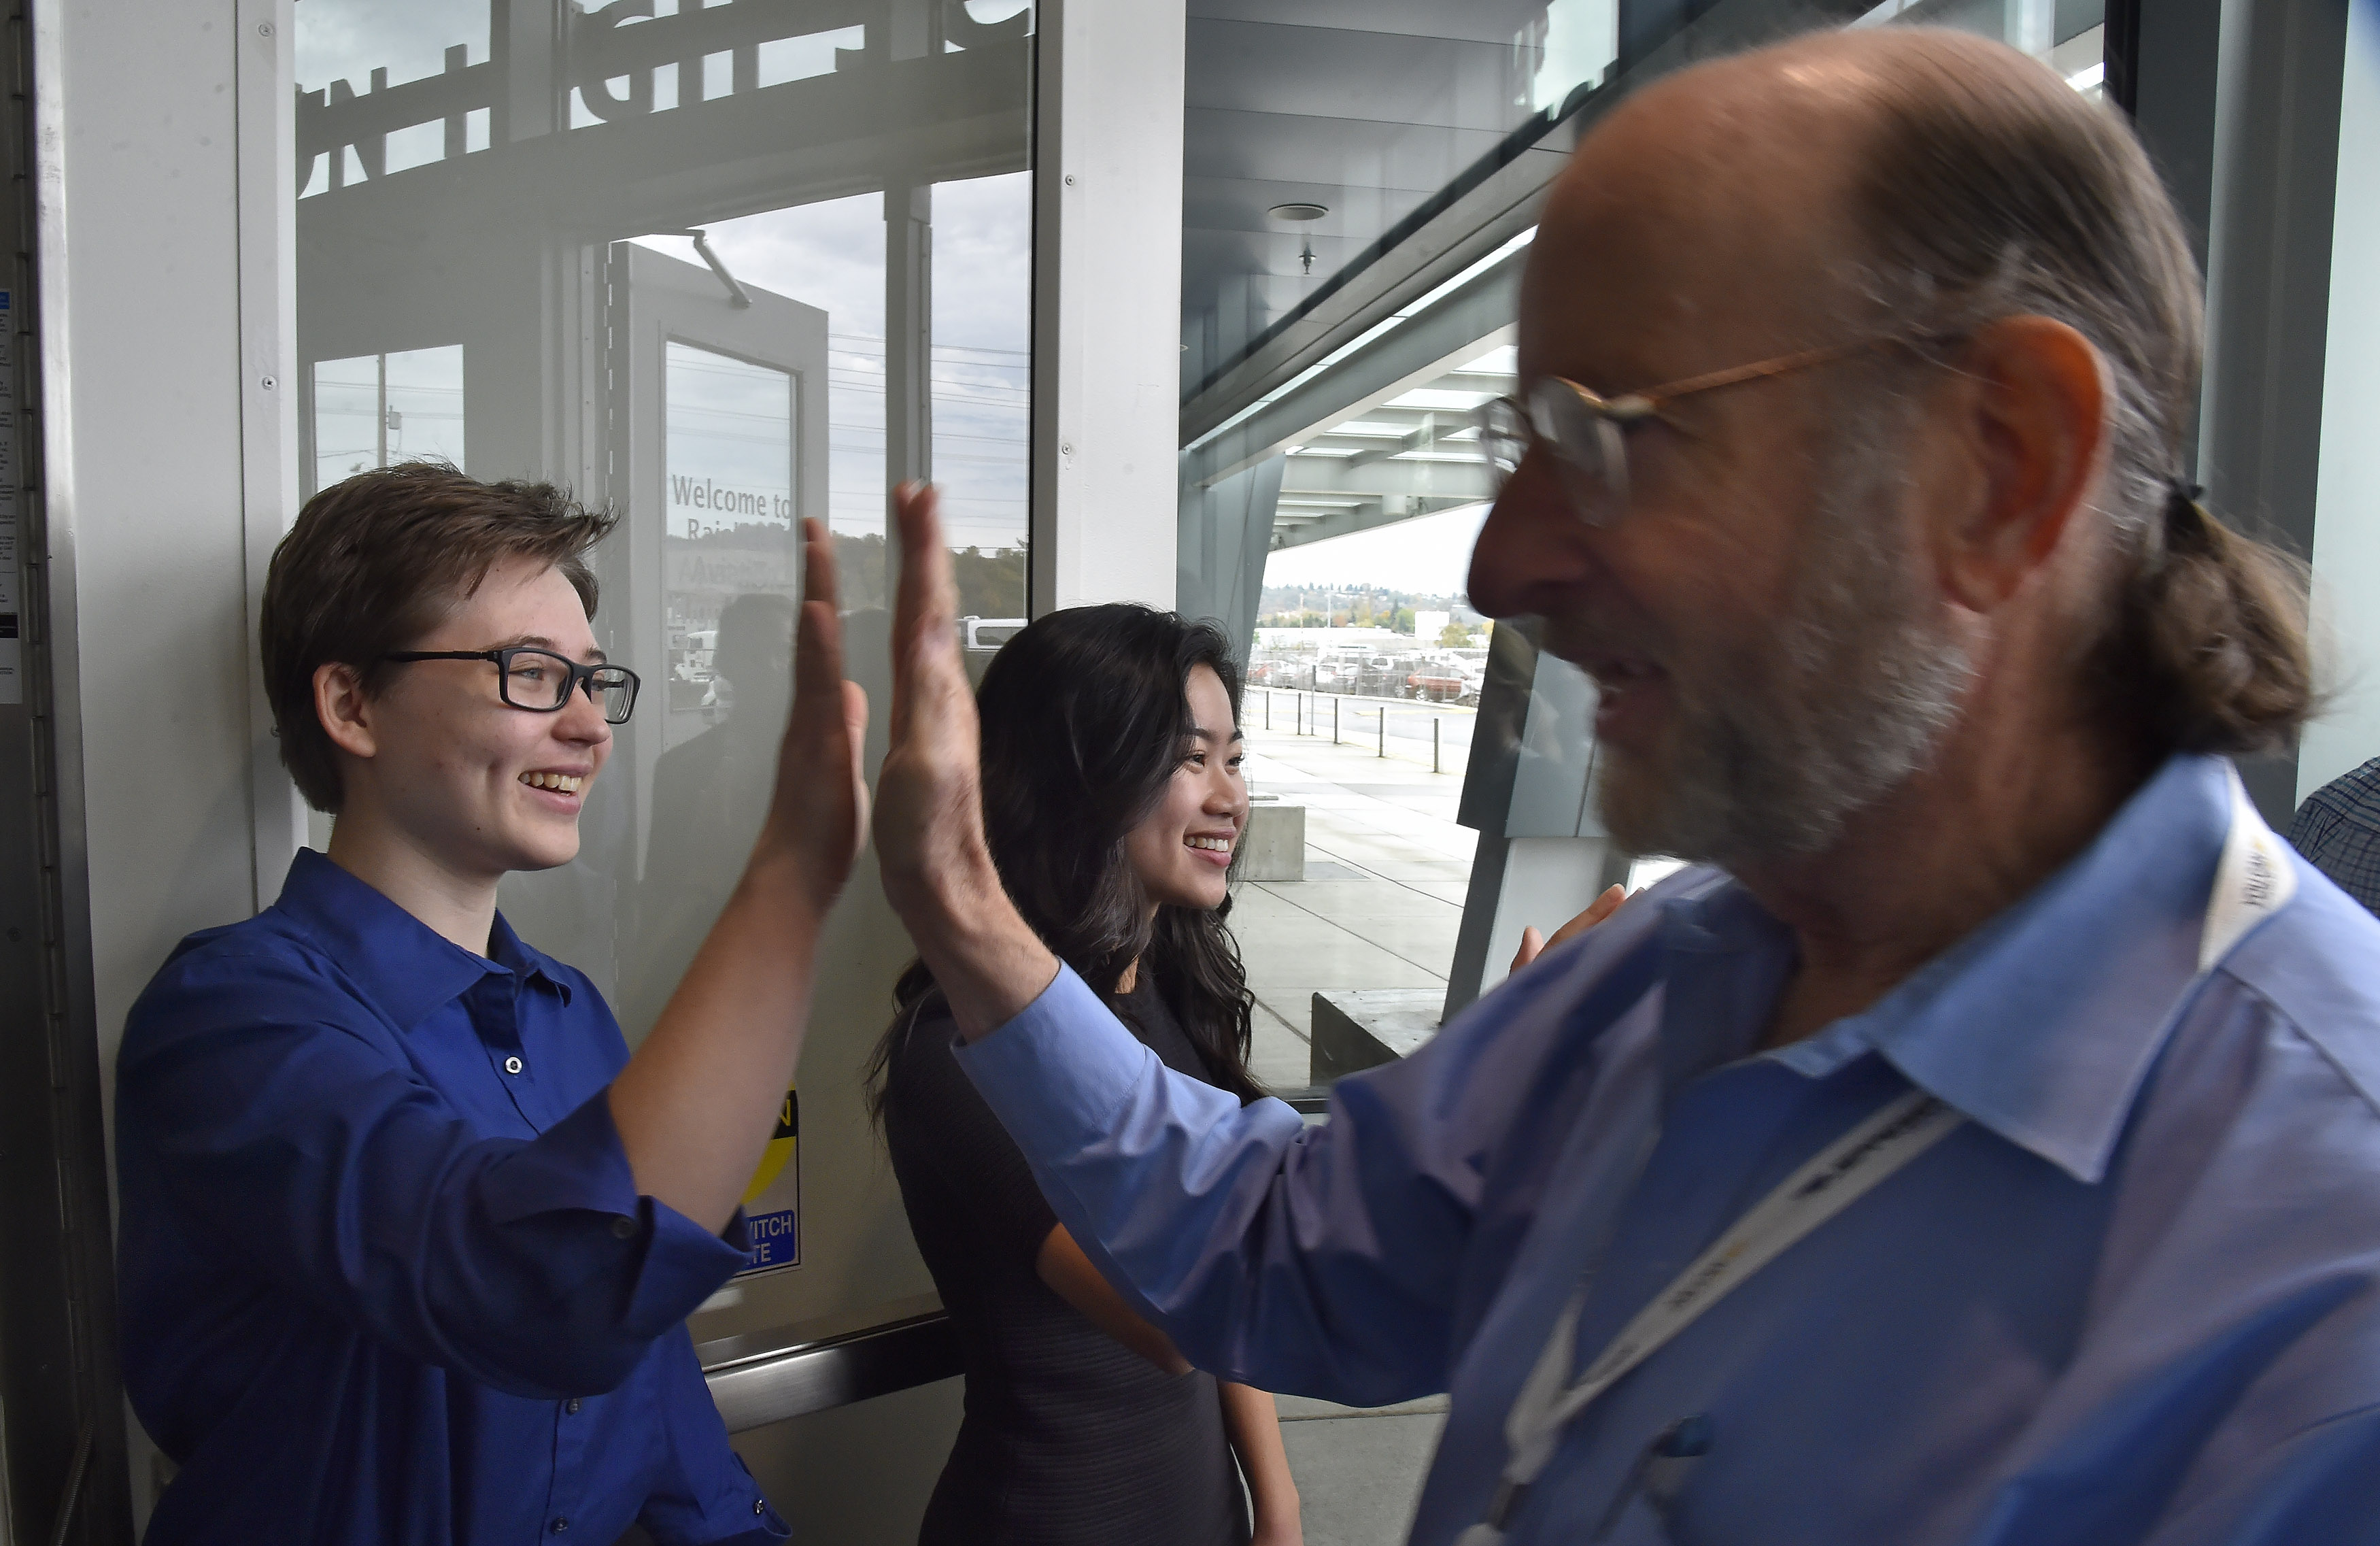 Raisbeck Aviation High School students greet AOPA High School Symposium attendees with a high-five during a tour of the facility in Seattle, Nov. 7. Photo by David Tulis.